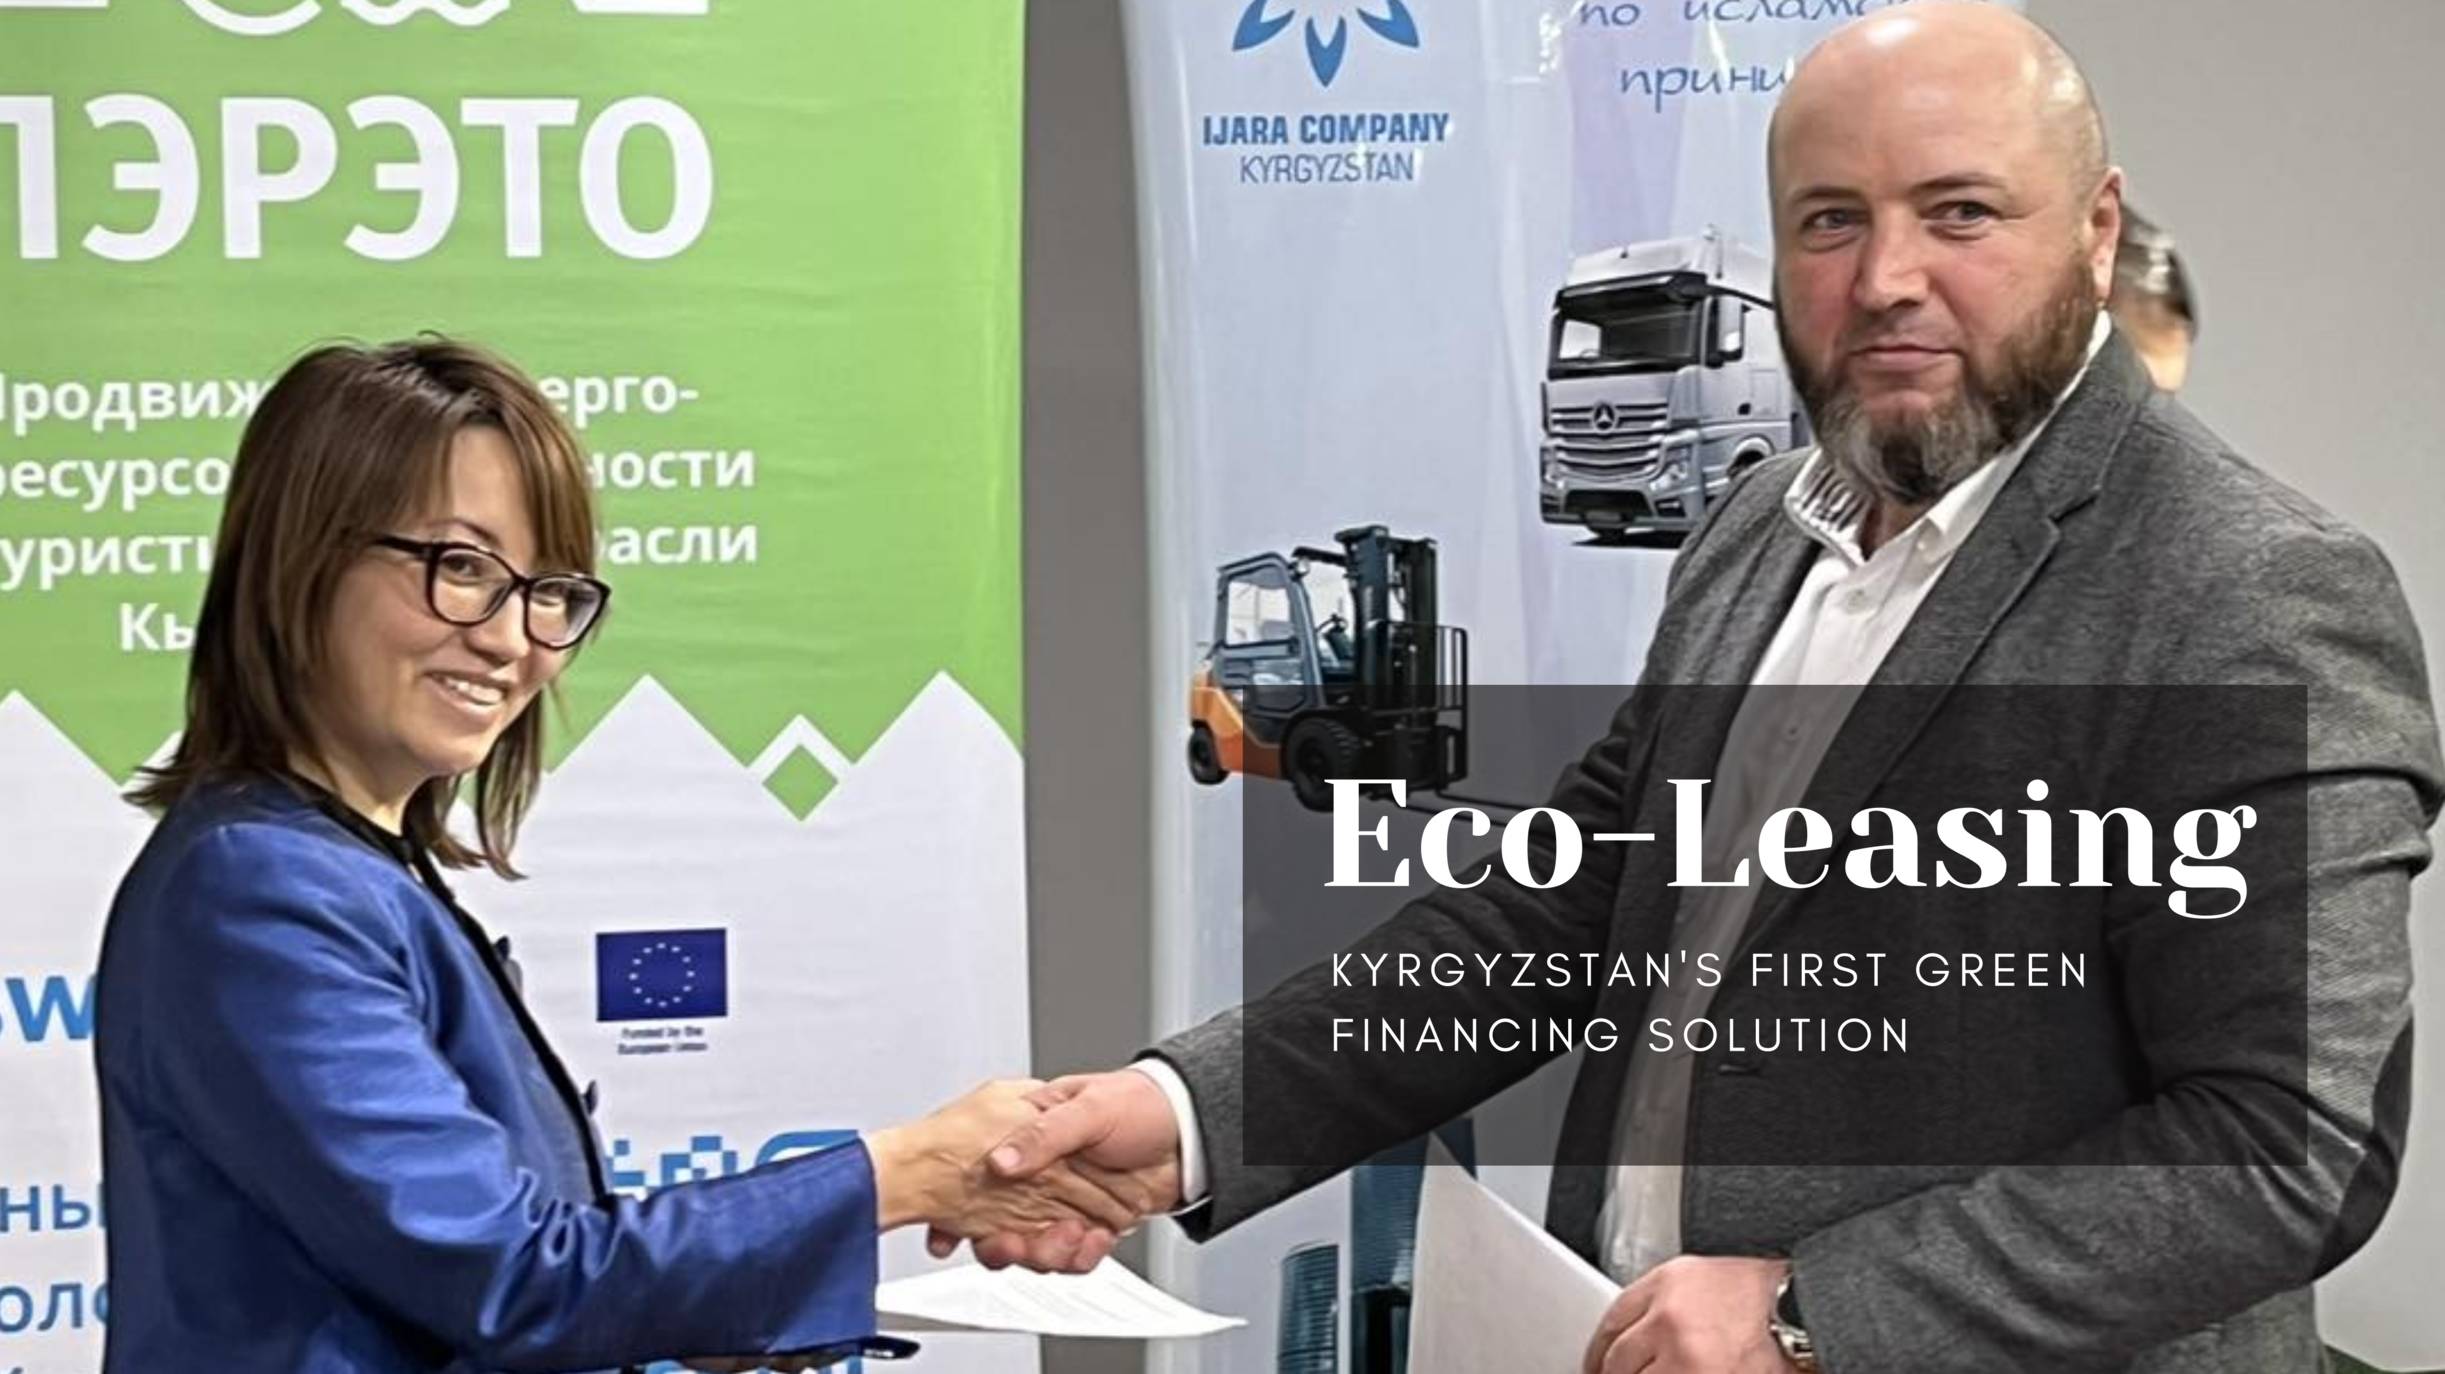 Eco-leasing: Kyrgyzstan's First Green Financing Solution